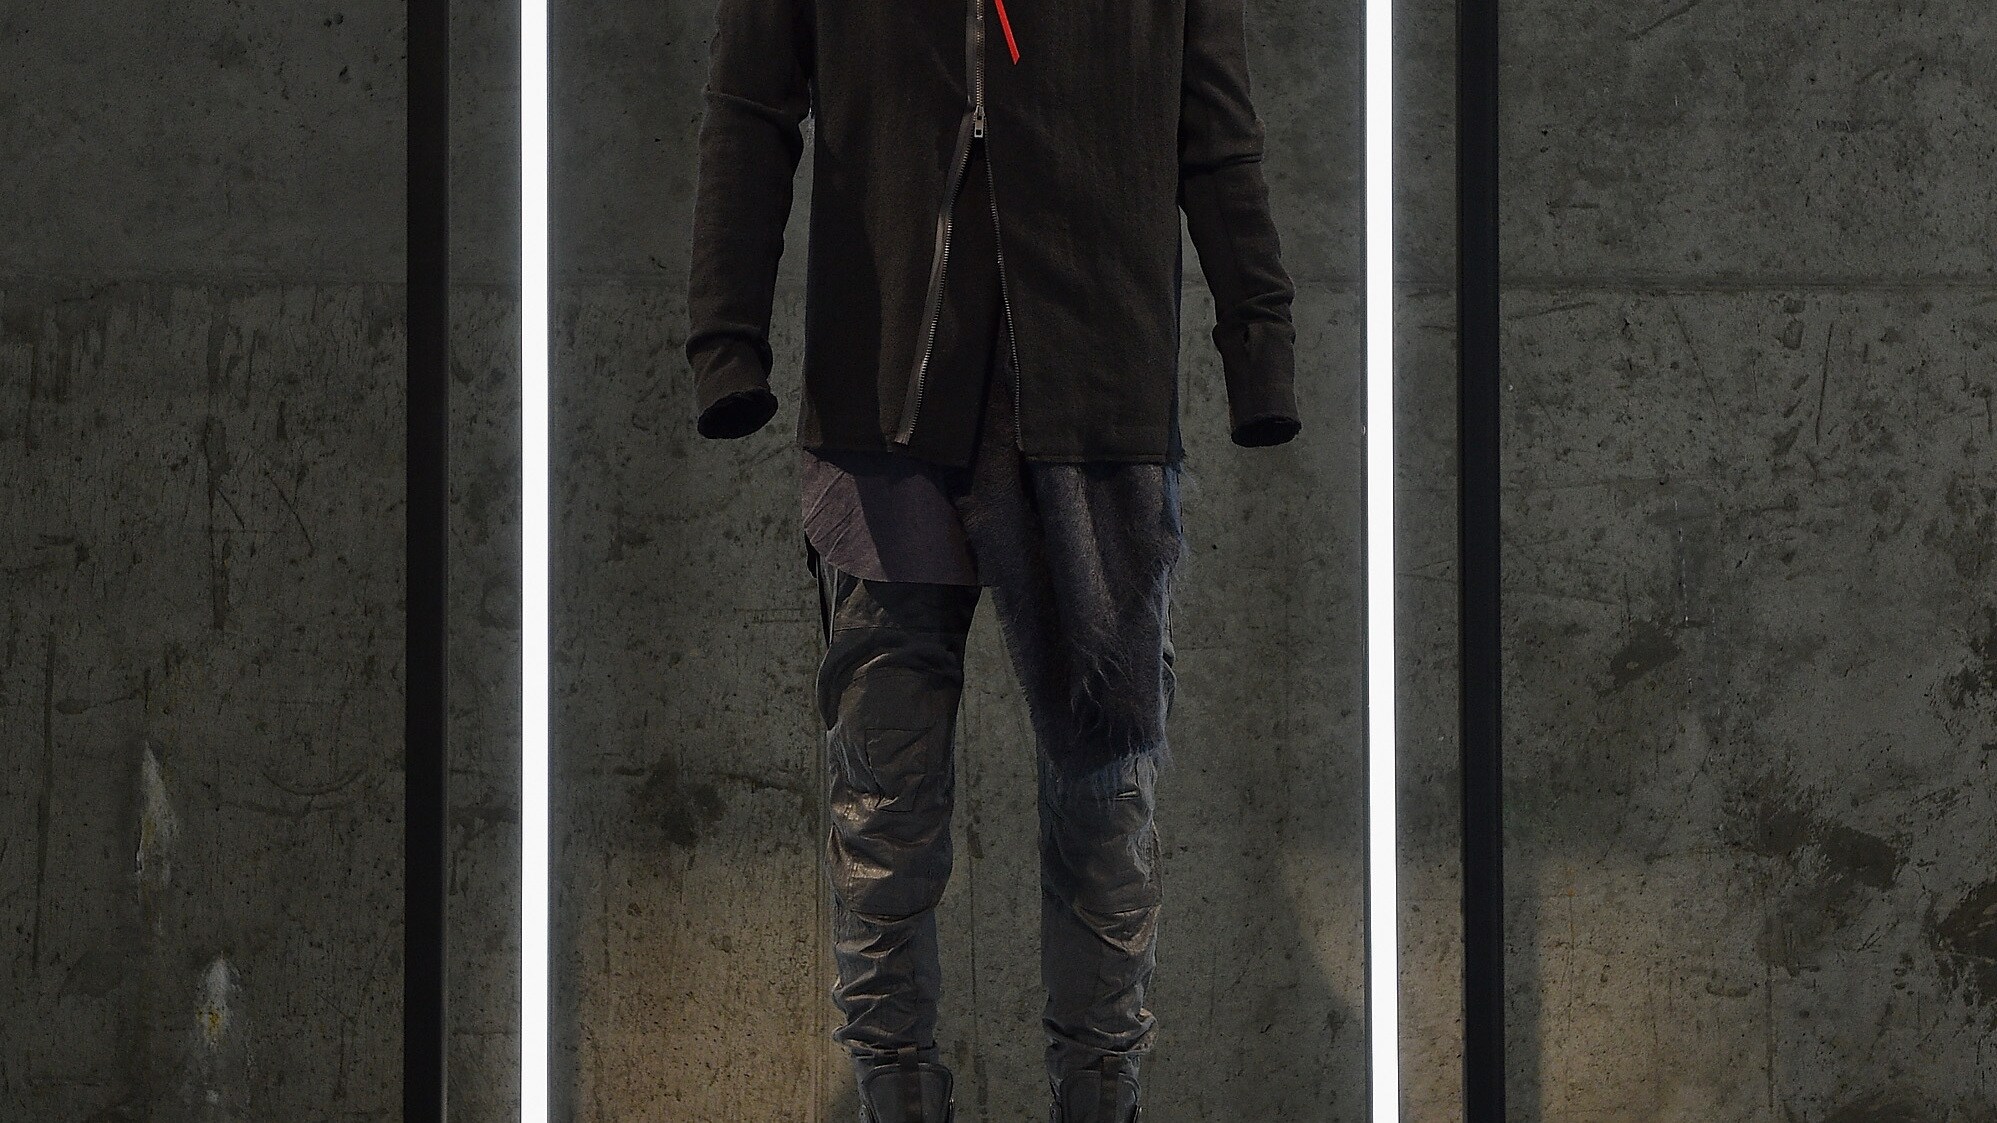 Force 4 Fashion - Rag and Bones Star Wars-inspired look